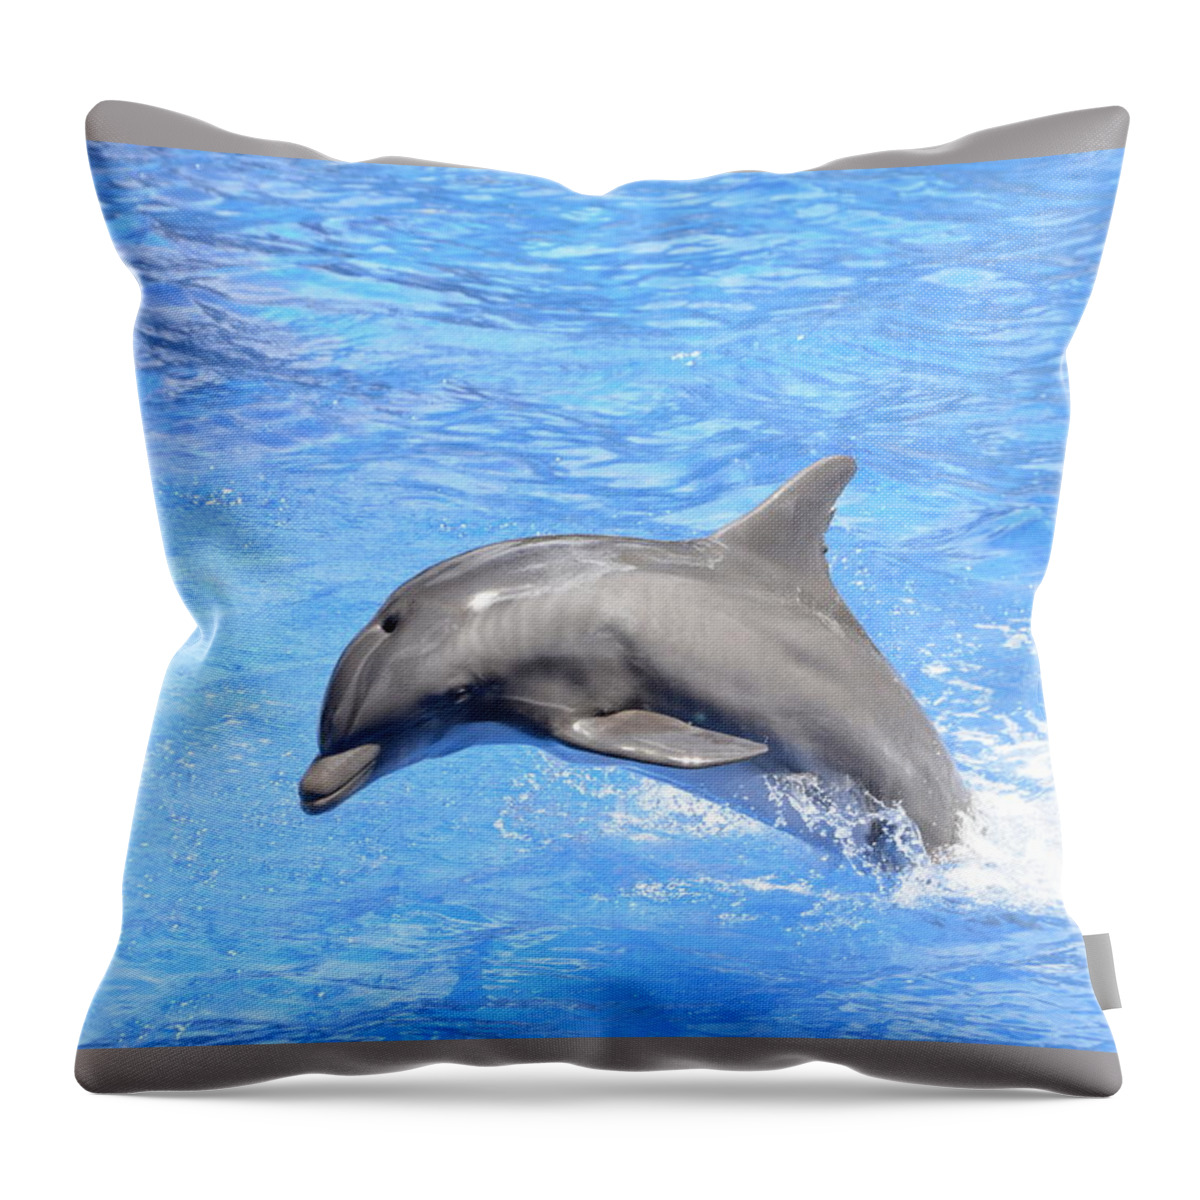 Dolphin Throw Pillow featuring the photograph Bottlenose Dolphin Jumping in Pool by Artful Imagery